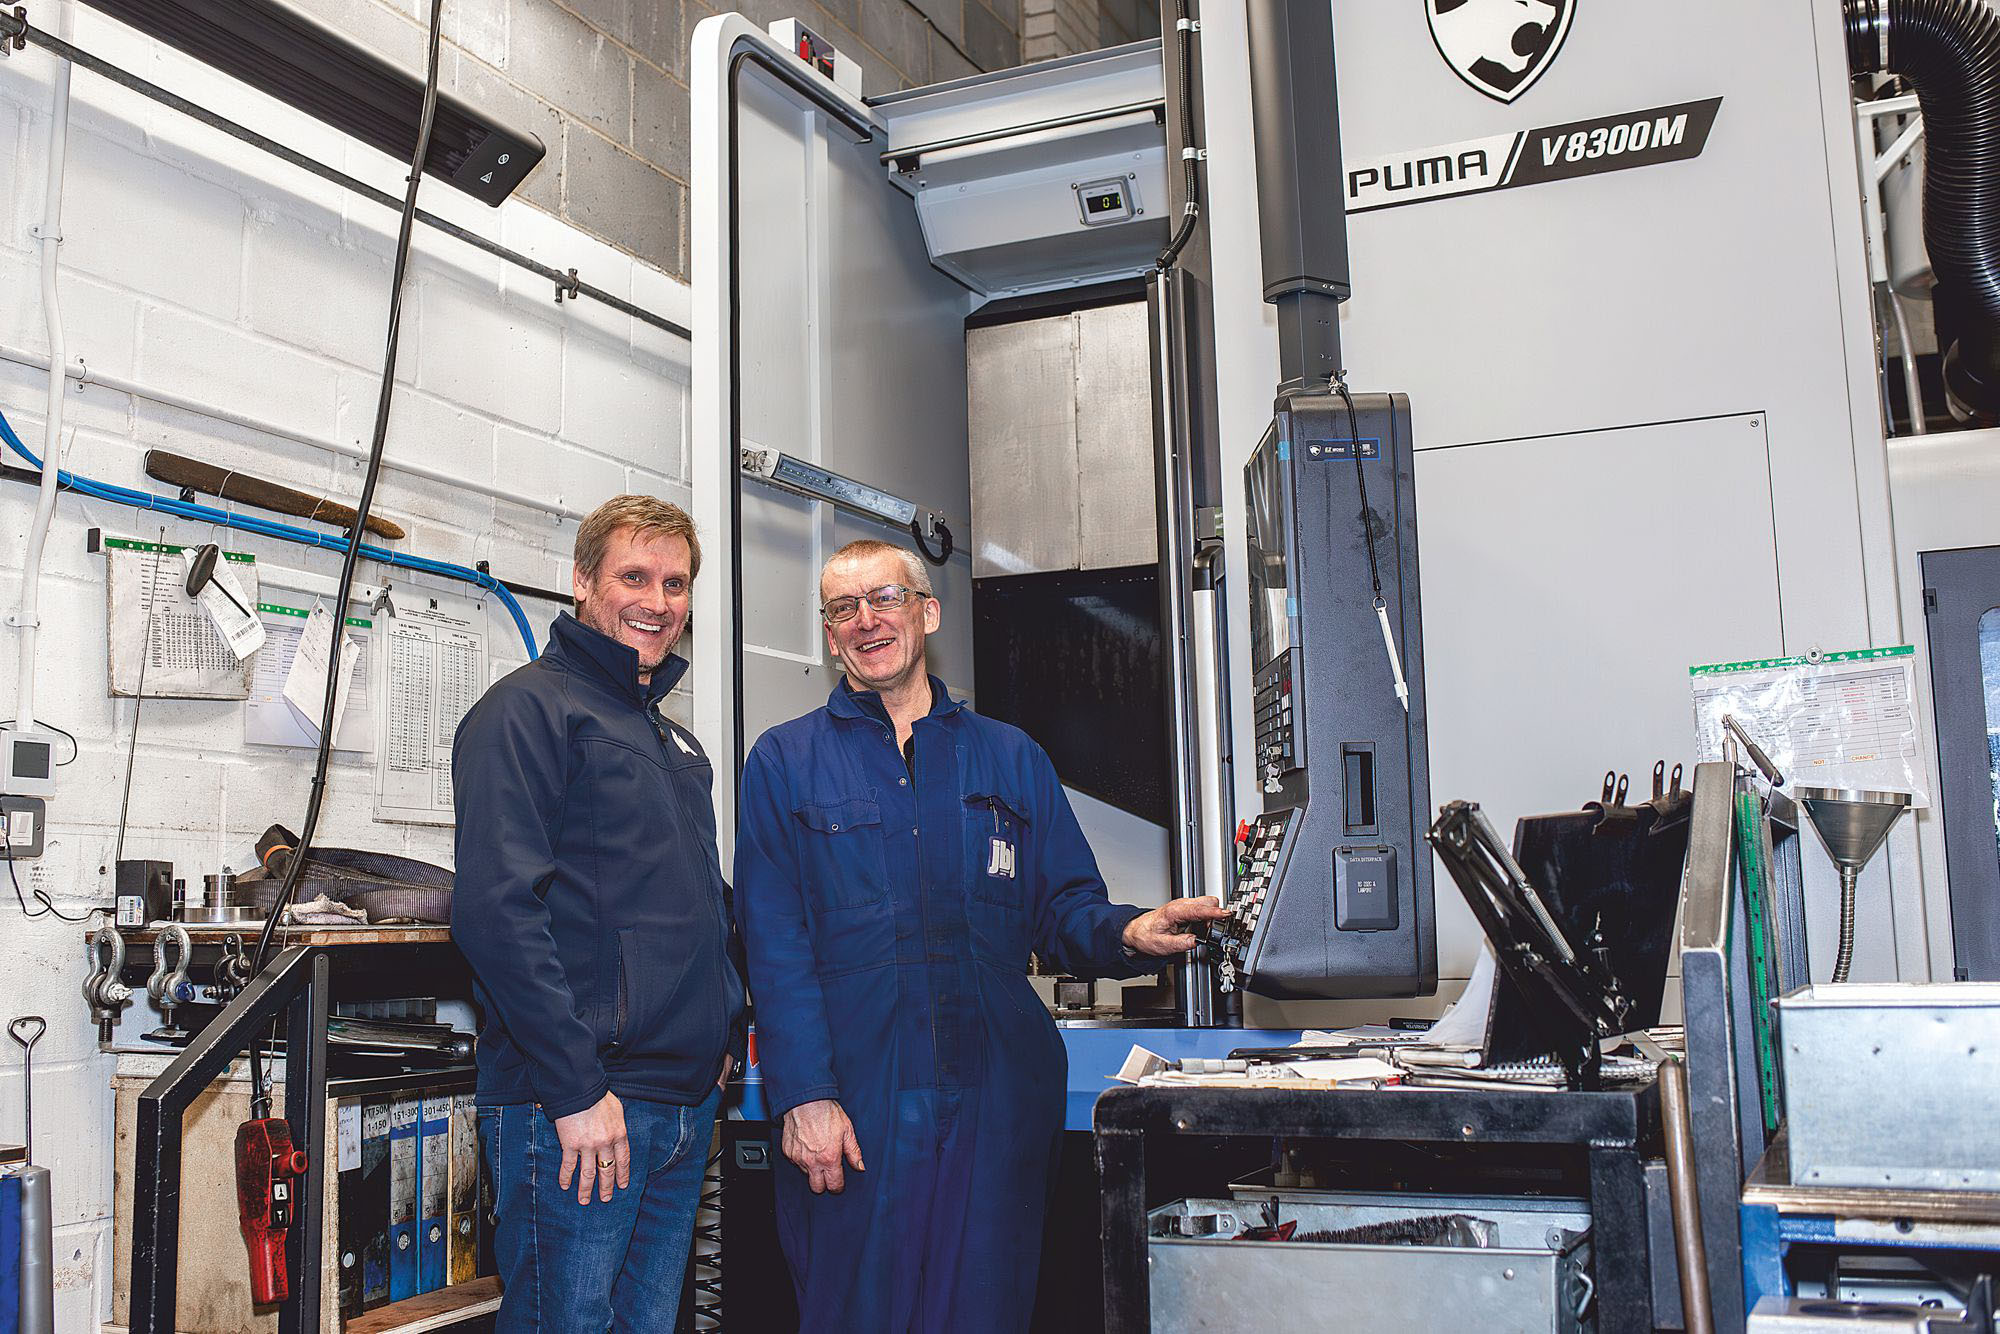 Operators in front of a DN Solutions Puma V8300M vertical turning lathe